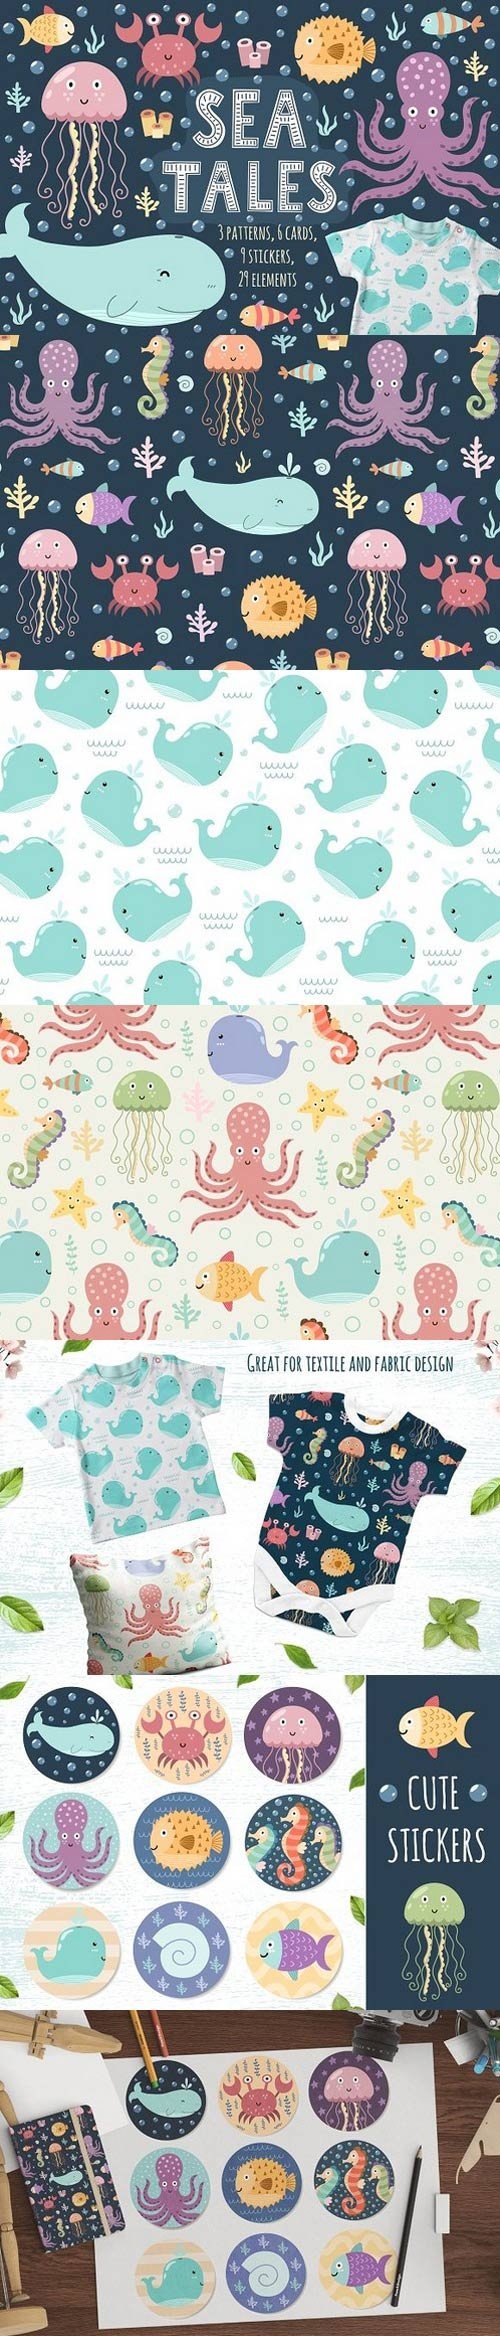 Sea Tales: patterns, stickers, cards 1702638